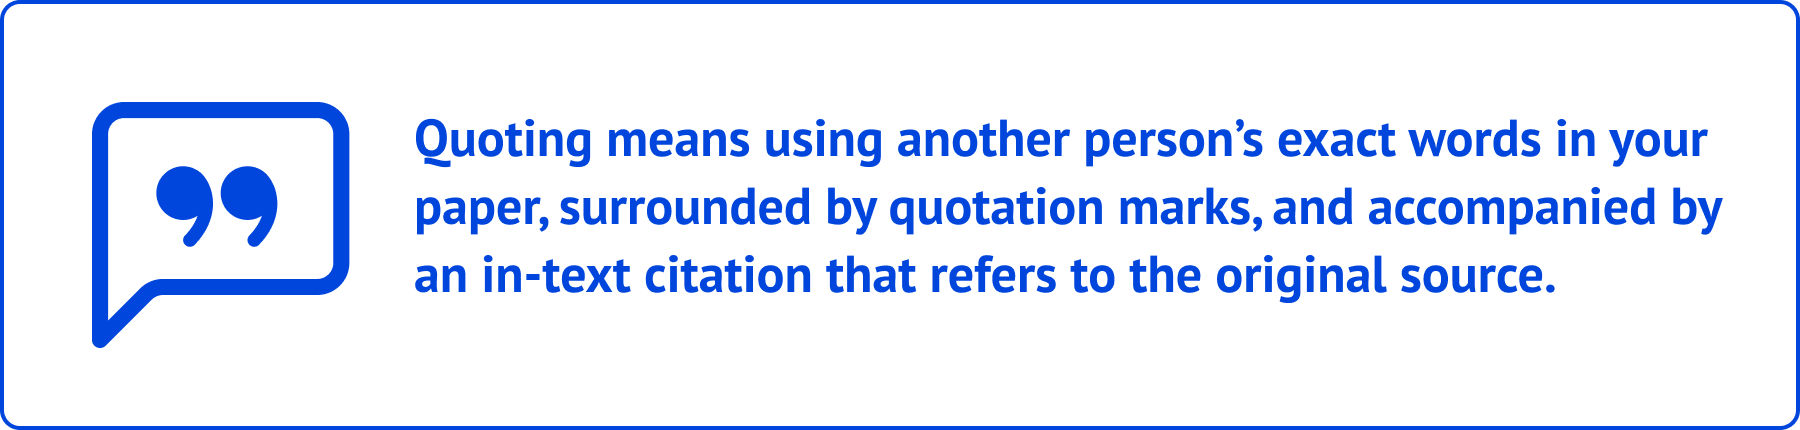 What Must Be Done To Avoid Plagiarism When Including A Direct Quotation In A Research Paper?